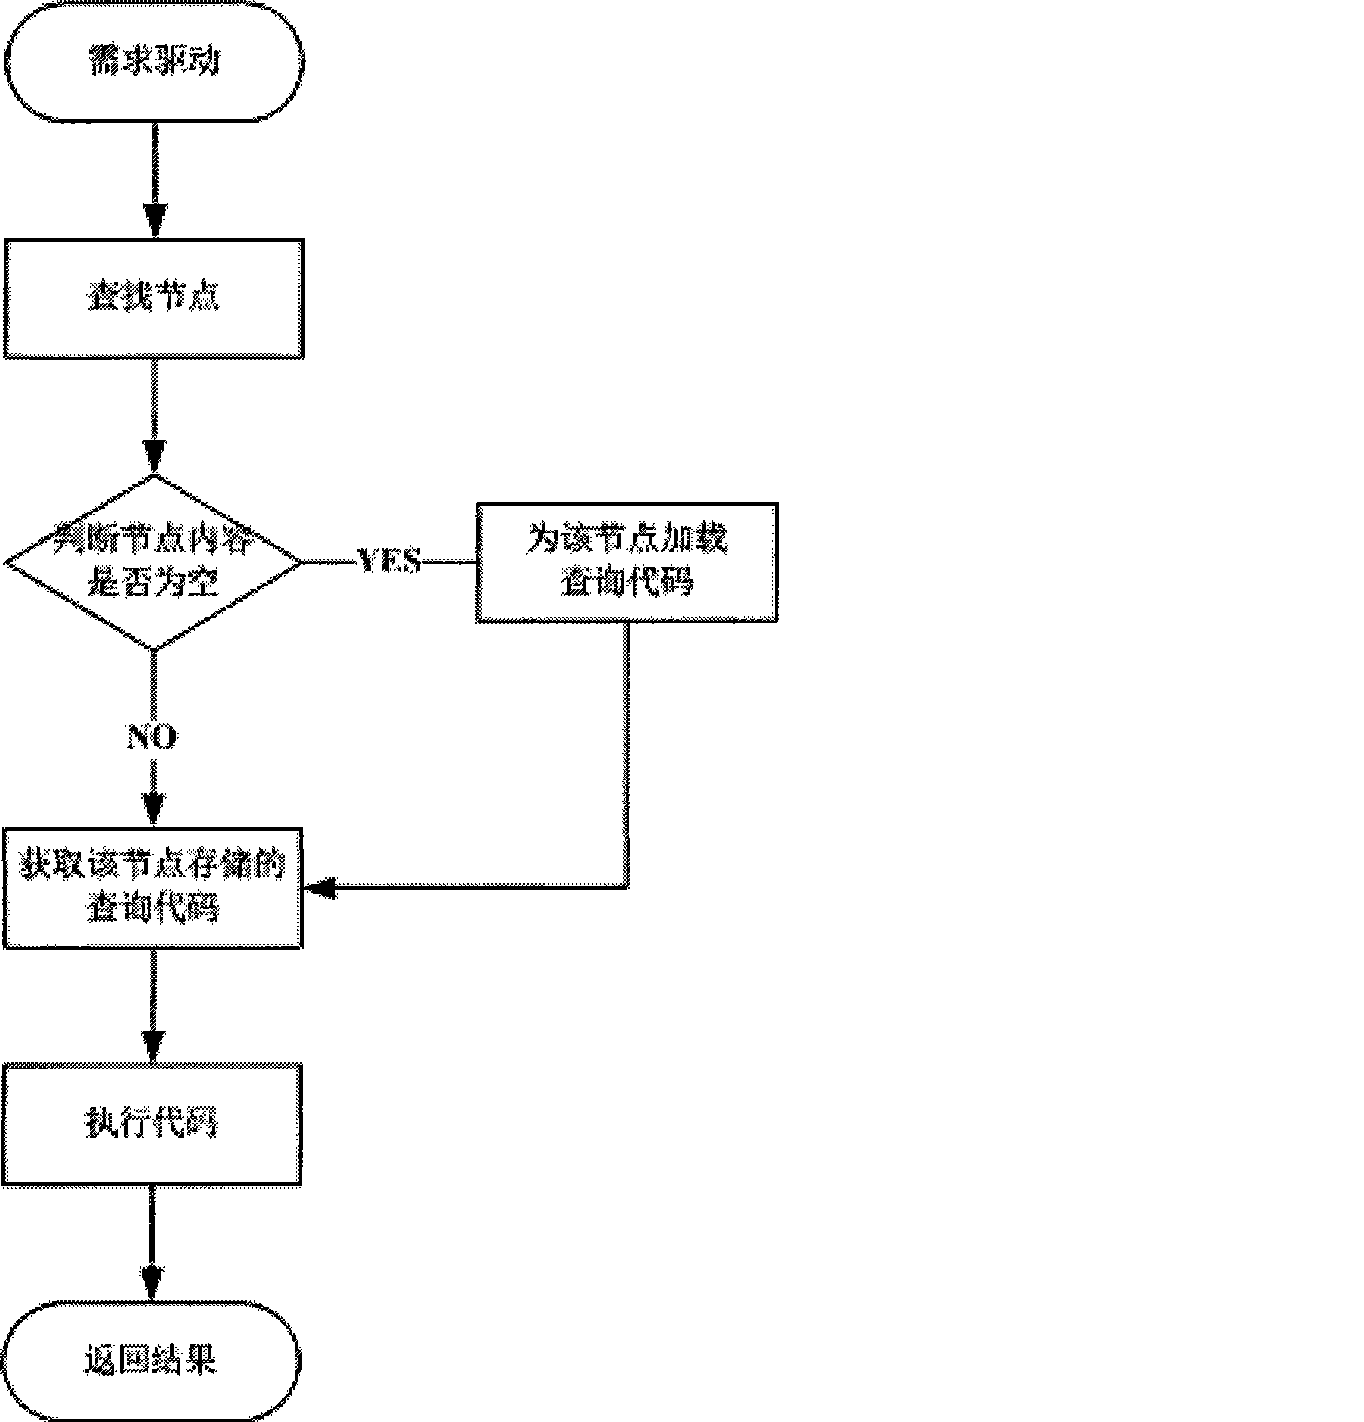 XML based industry information sorting and mapping method